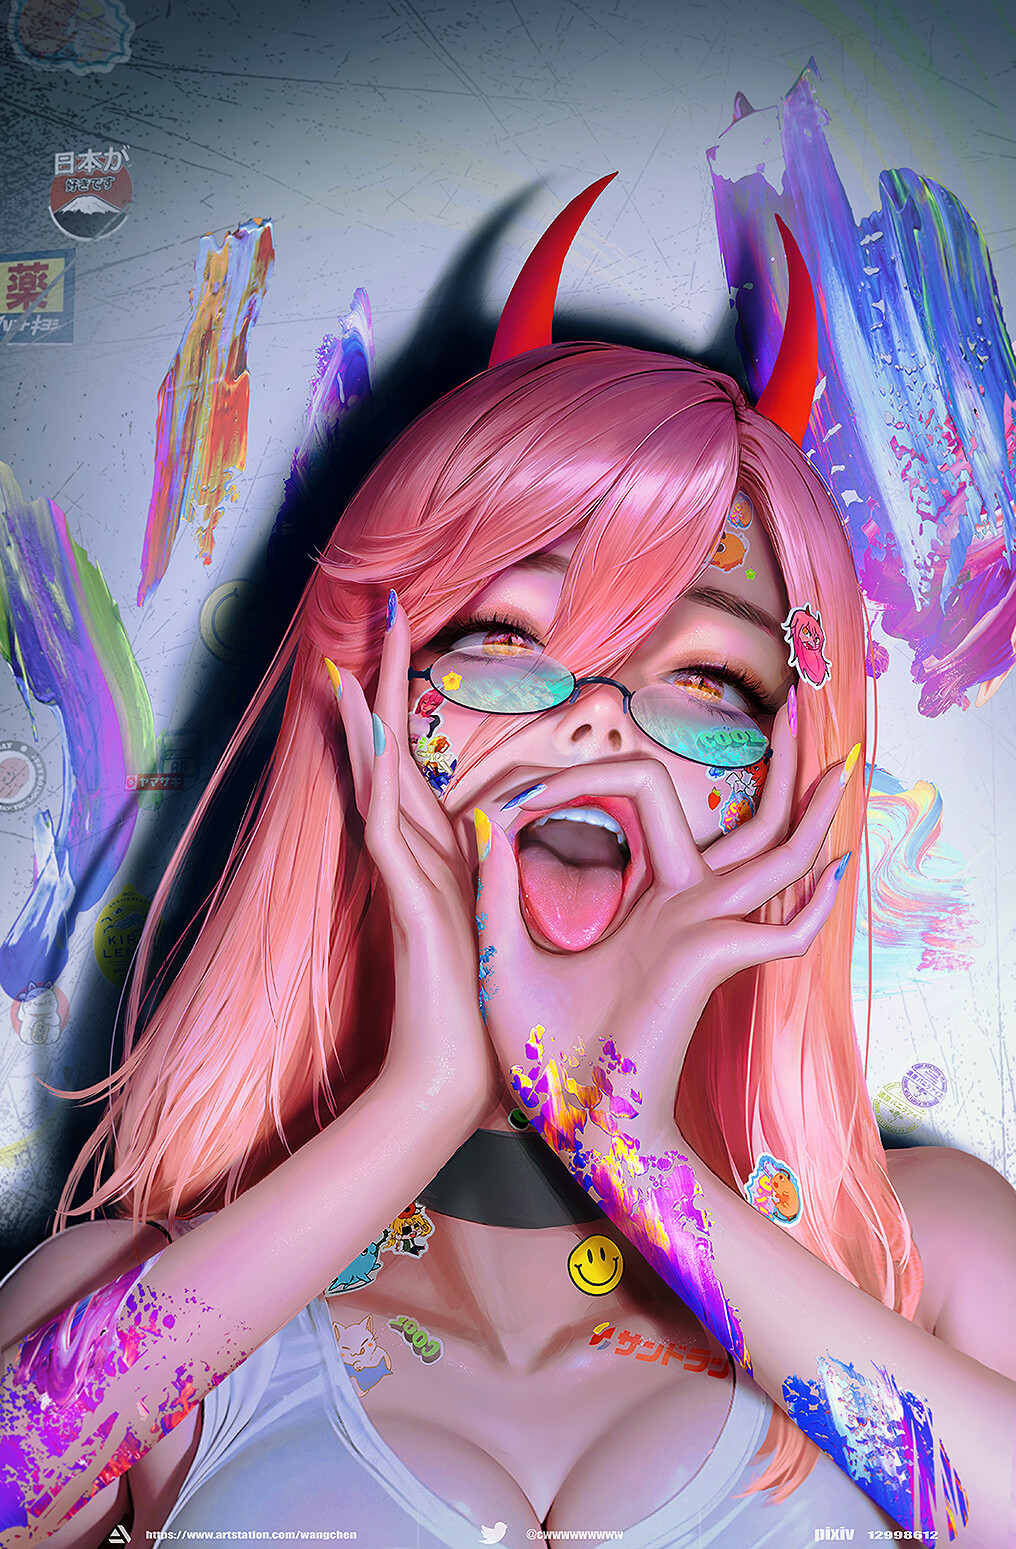 Chen Wang Women Pink Hair Tongue Out Body Paint Colorful Glasses Chainsaw Man Anime Girls Open Mouth 1016x1549